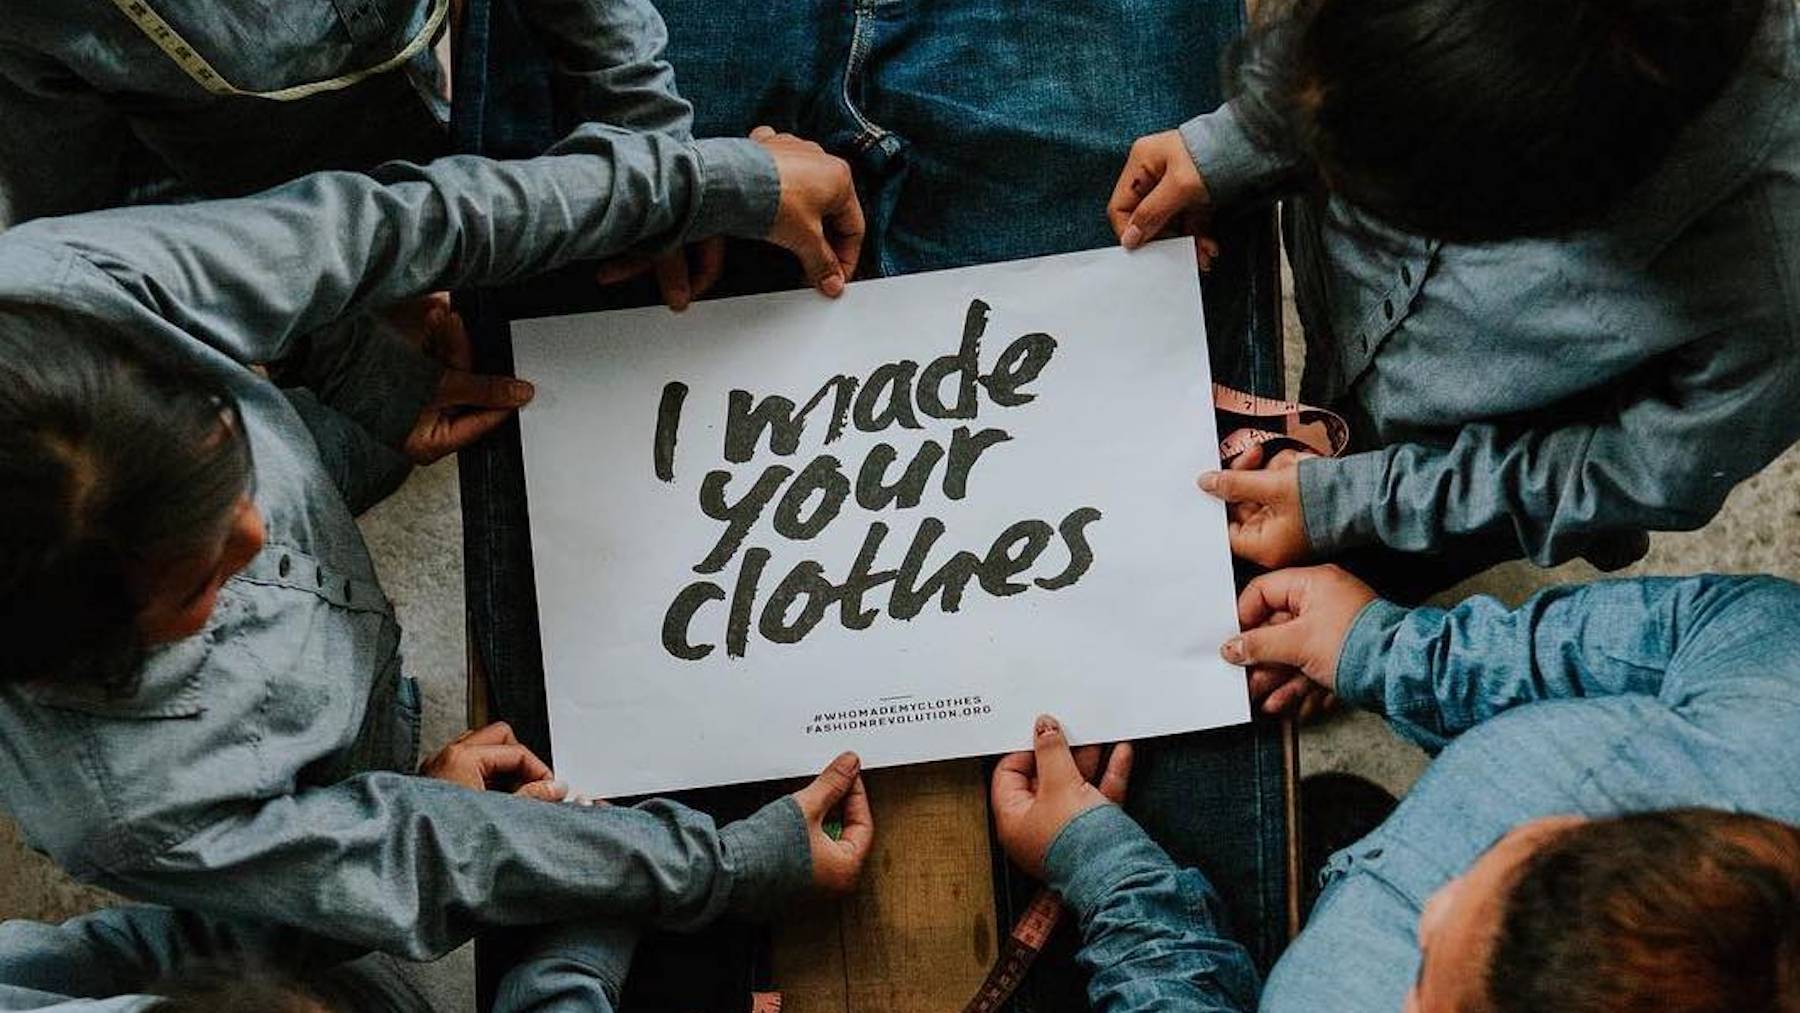 A group of denim garment-makers hold a sign saying "I made your clothes."